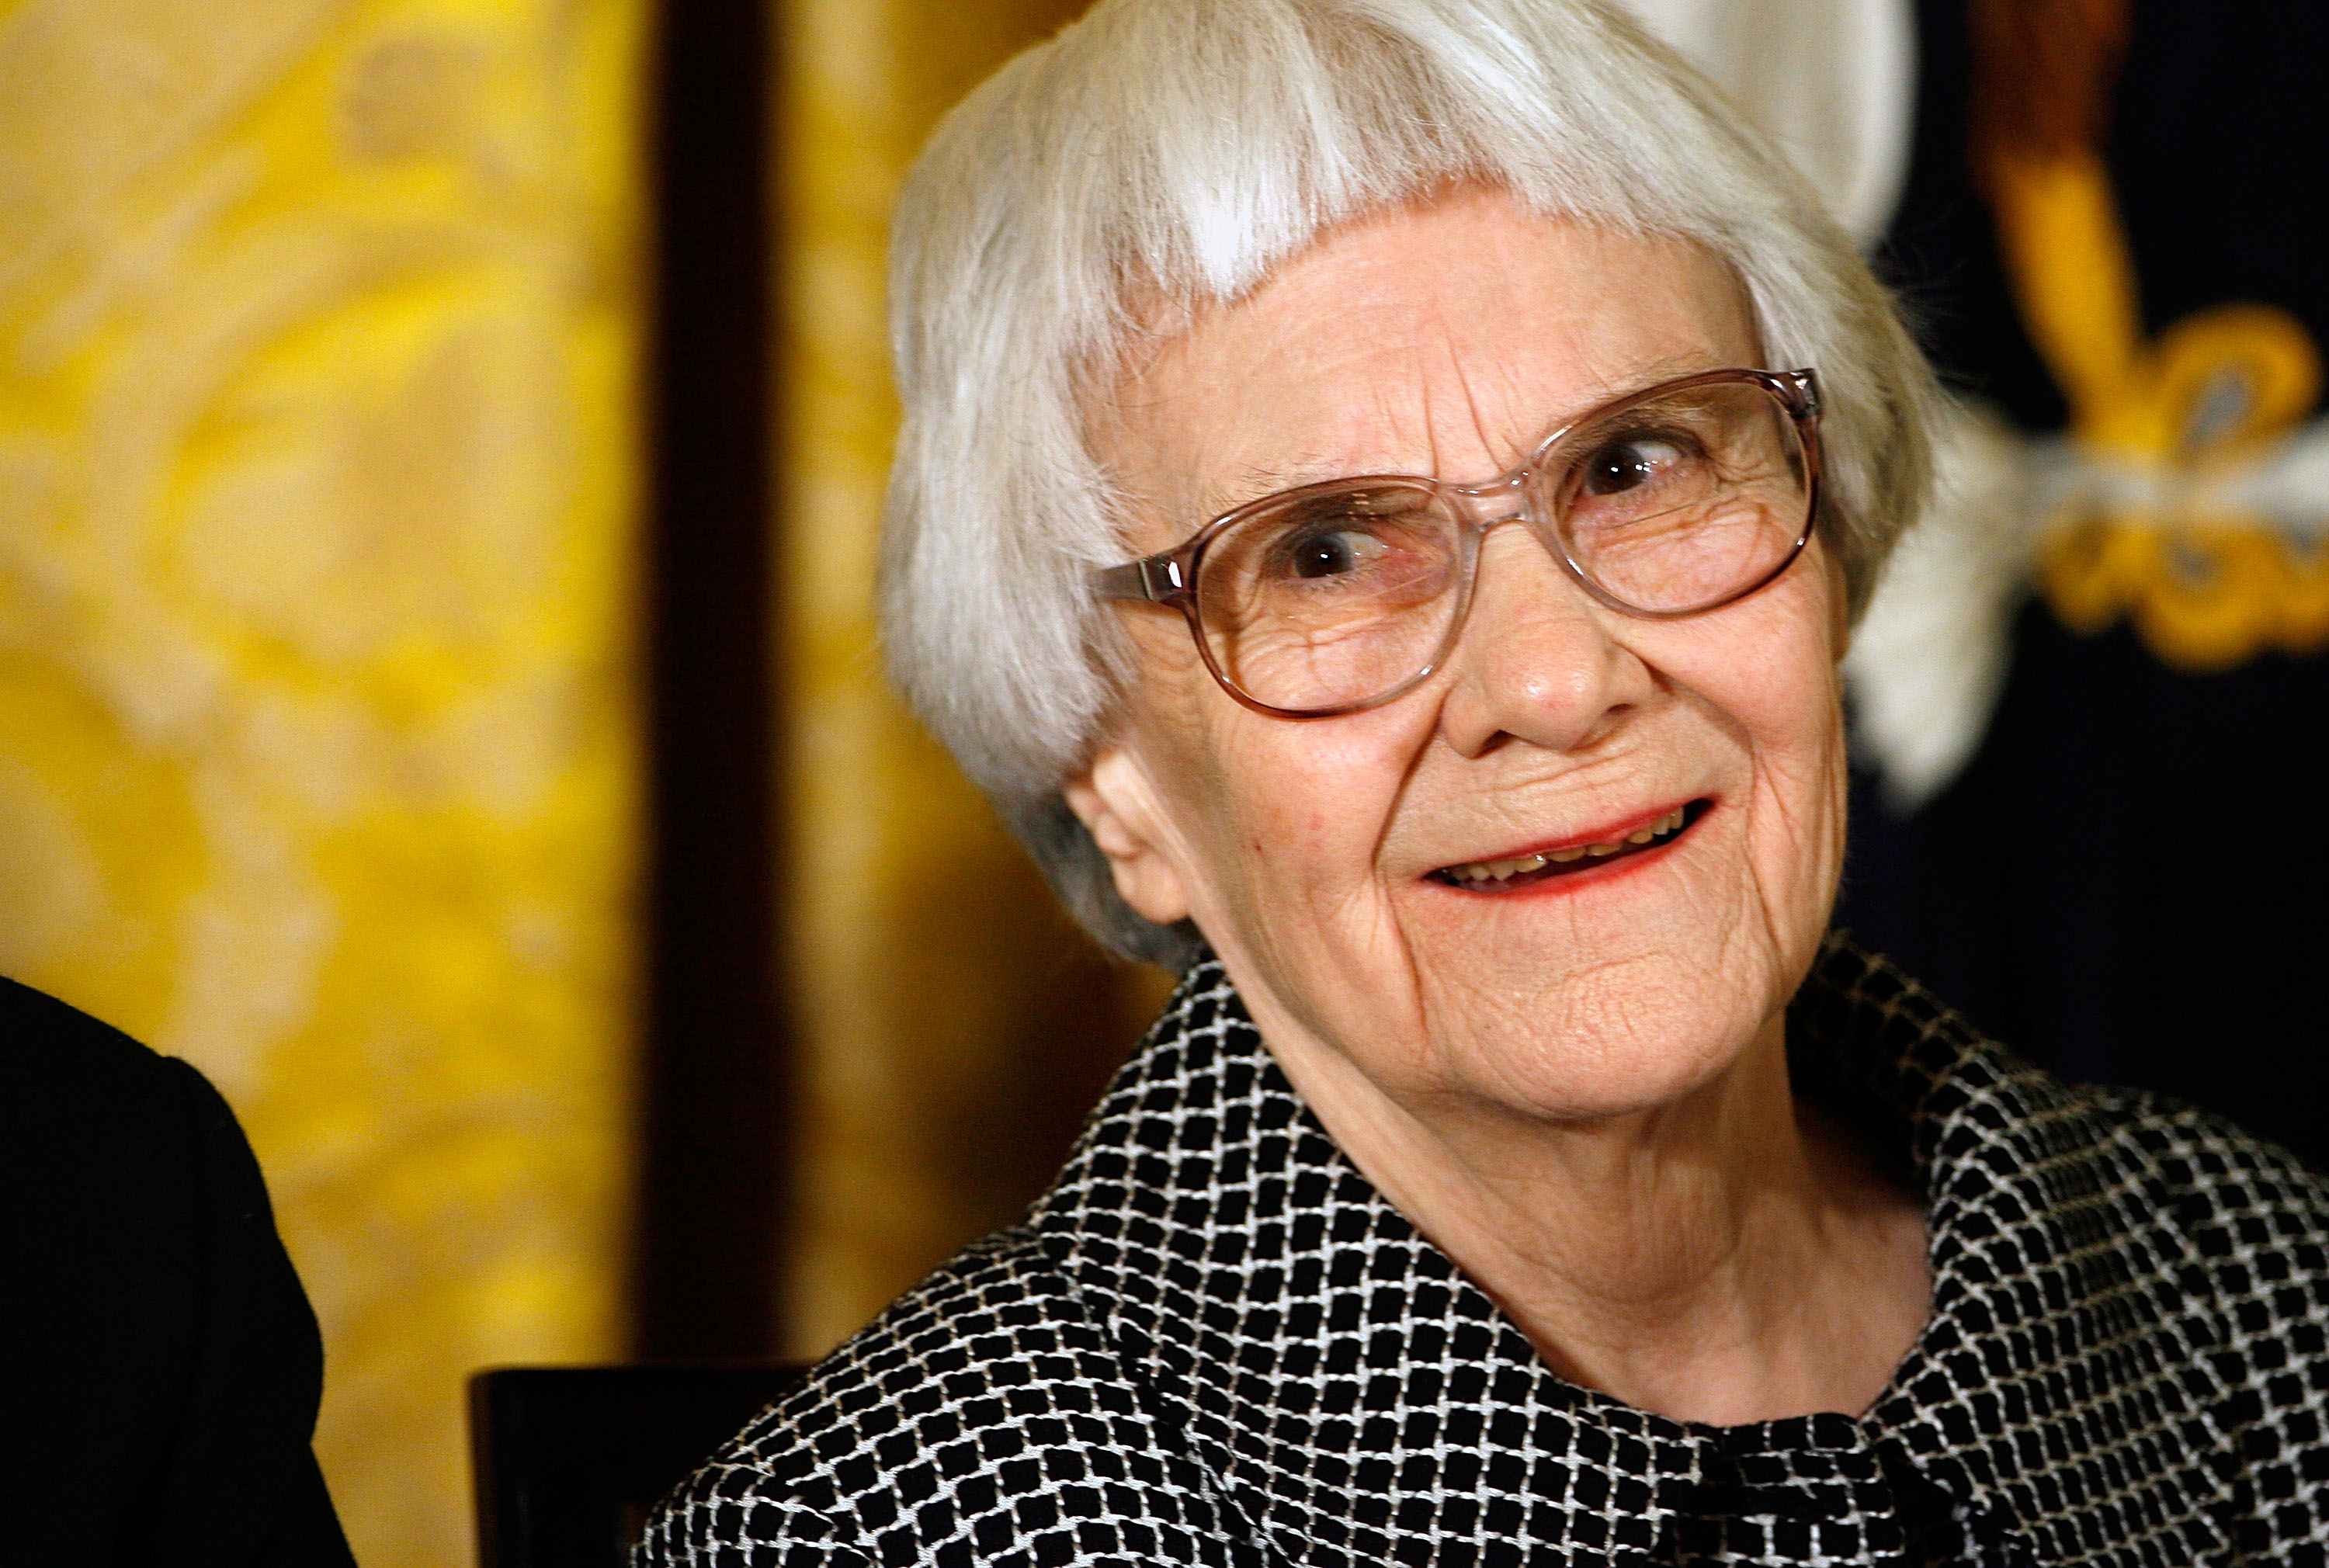 Pulitzer Prize winner and 'To Kill A Mockingbird' author Harper Lee smiles before receiving the 2007 Presidential Medal of Freedom in the East Room of the White House November 5, 2007 in Washington, DC. (Chip Somodevilla—Getty Images)